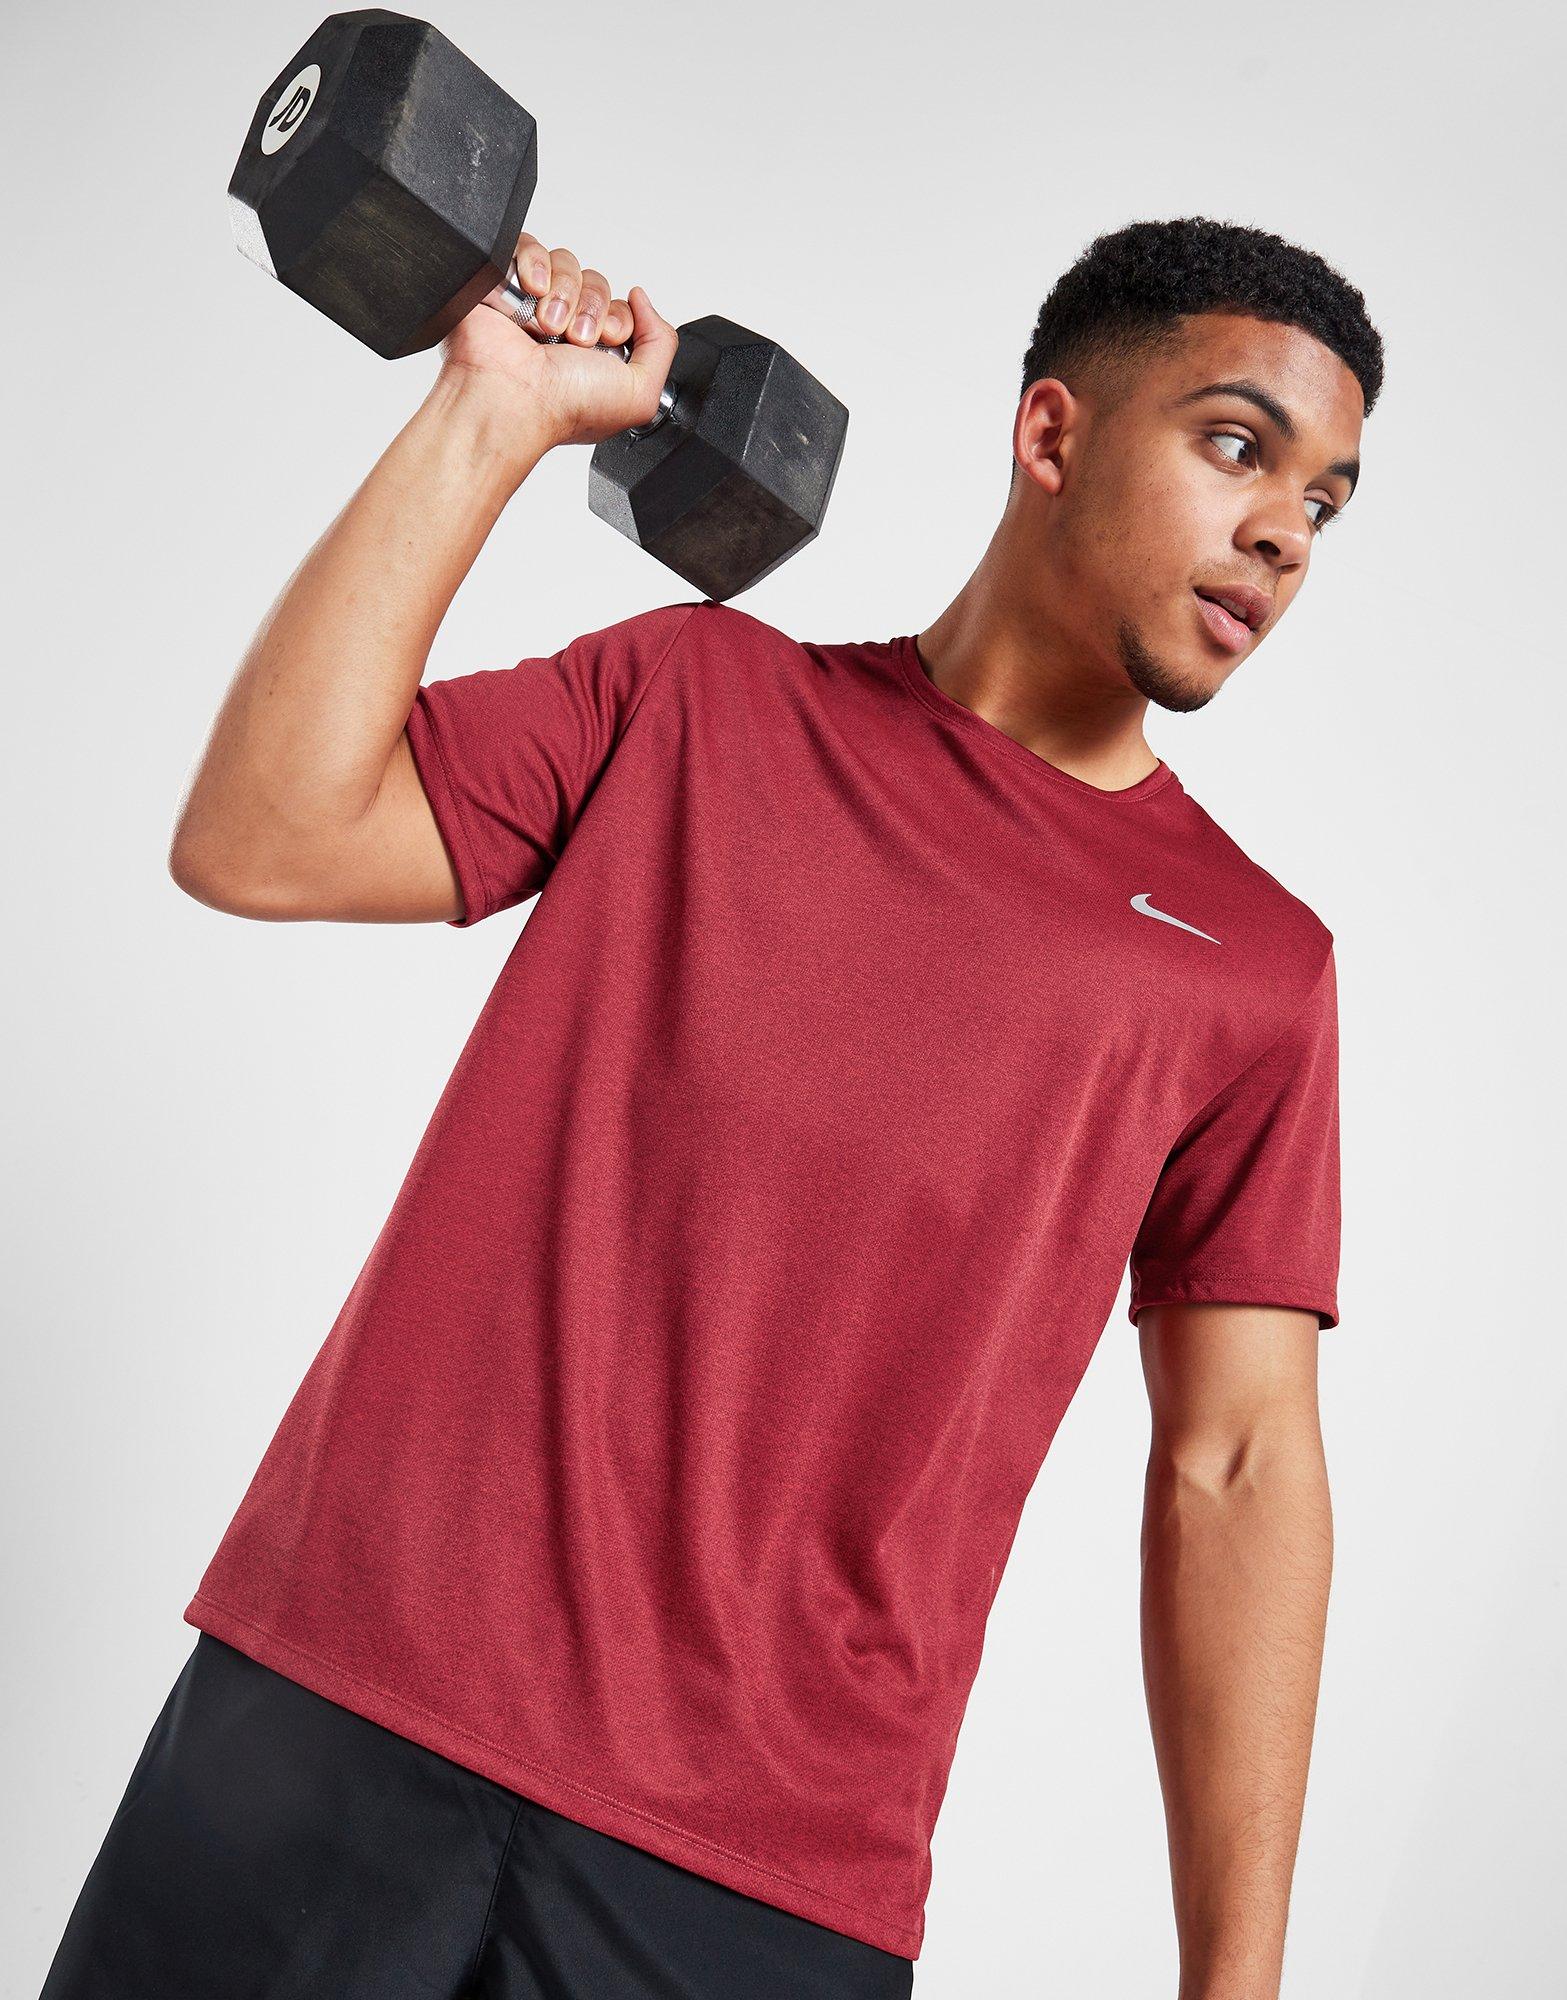 Nike or Under Armour Short Sleeve Dri Fit Shirt -GREY or MAROON with M